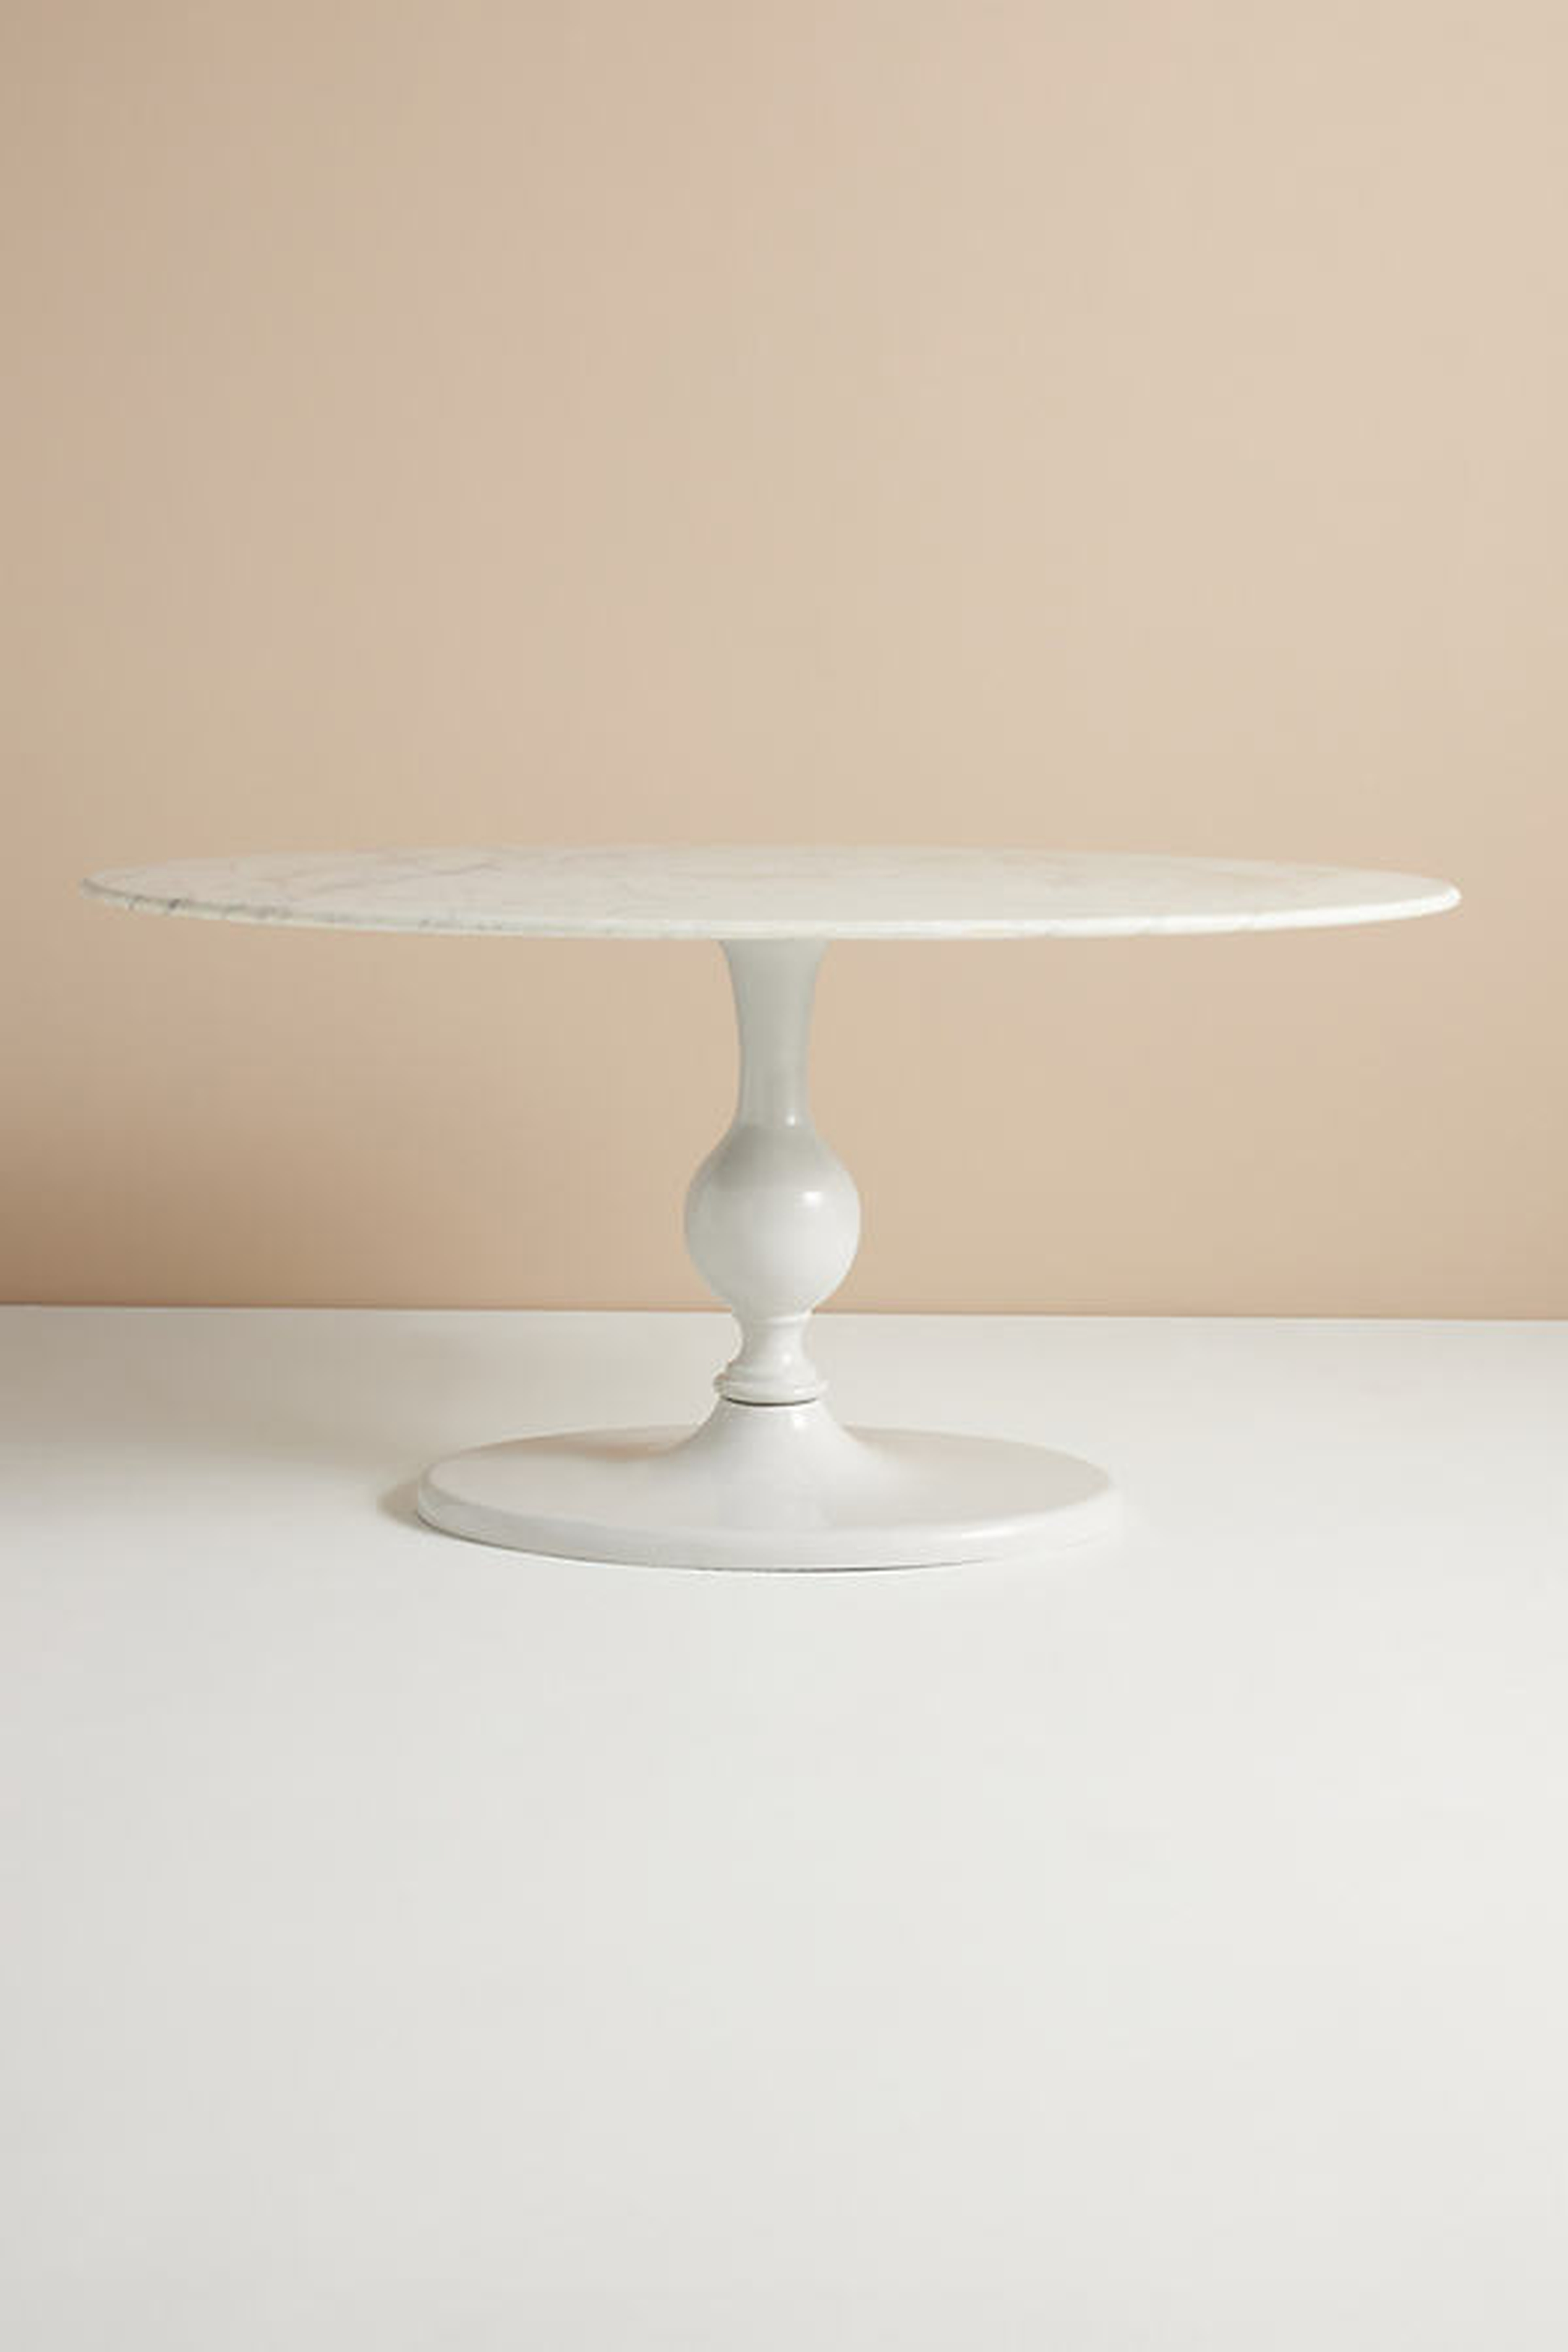 Annaway Oval Dining Table By Anthropologie in White - Anthropologie